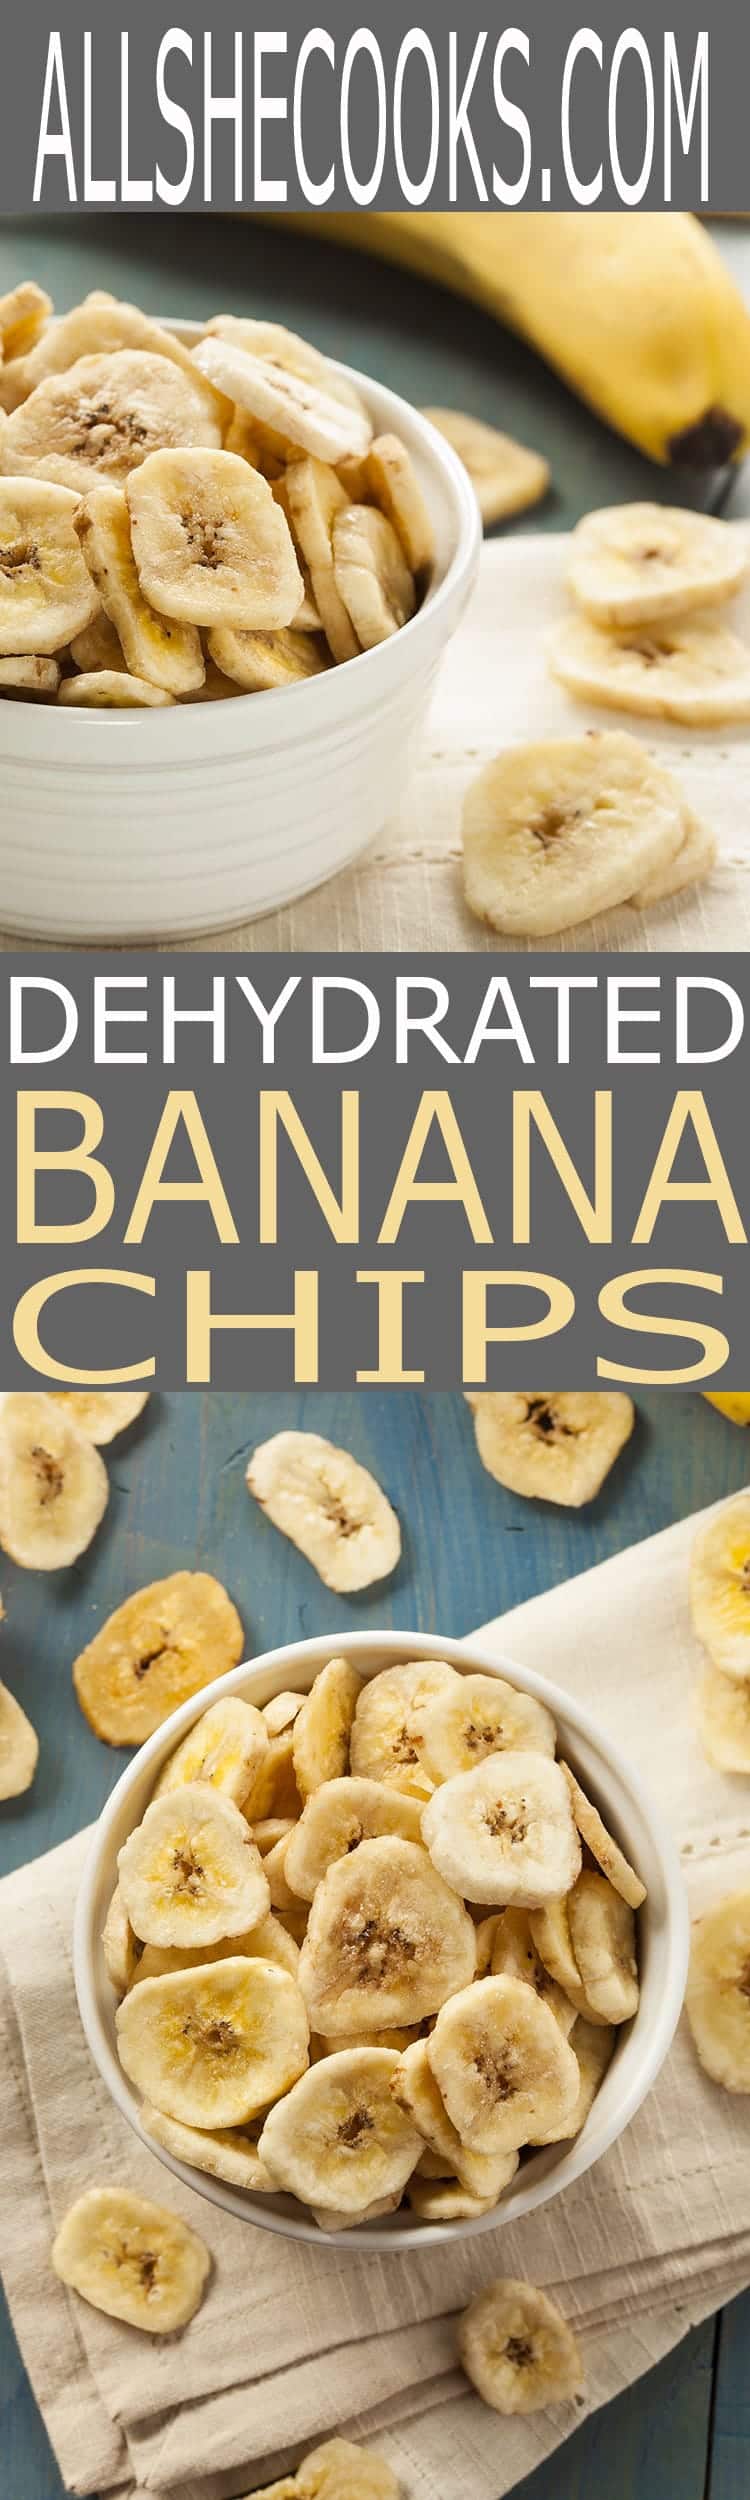 Dehydrated Banana Chips are easy to make at home with or without a dehydrator. Banana Chips make for a healthy snack option that will fill you up until your next meal.